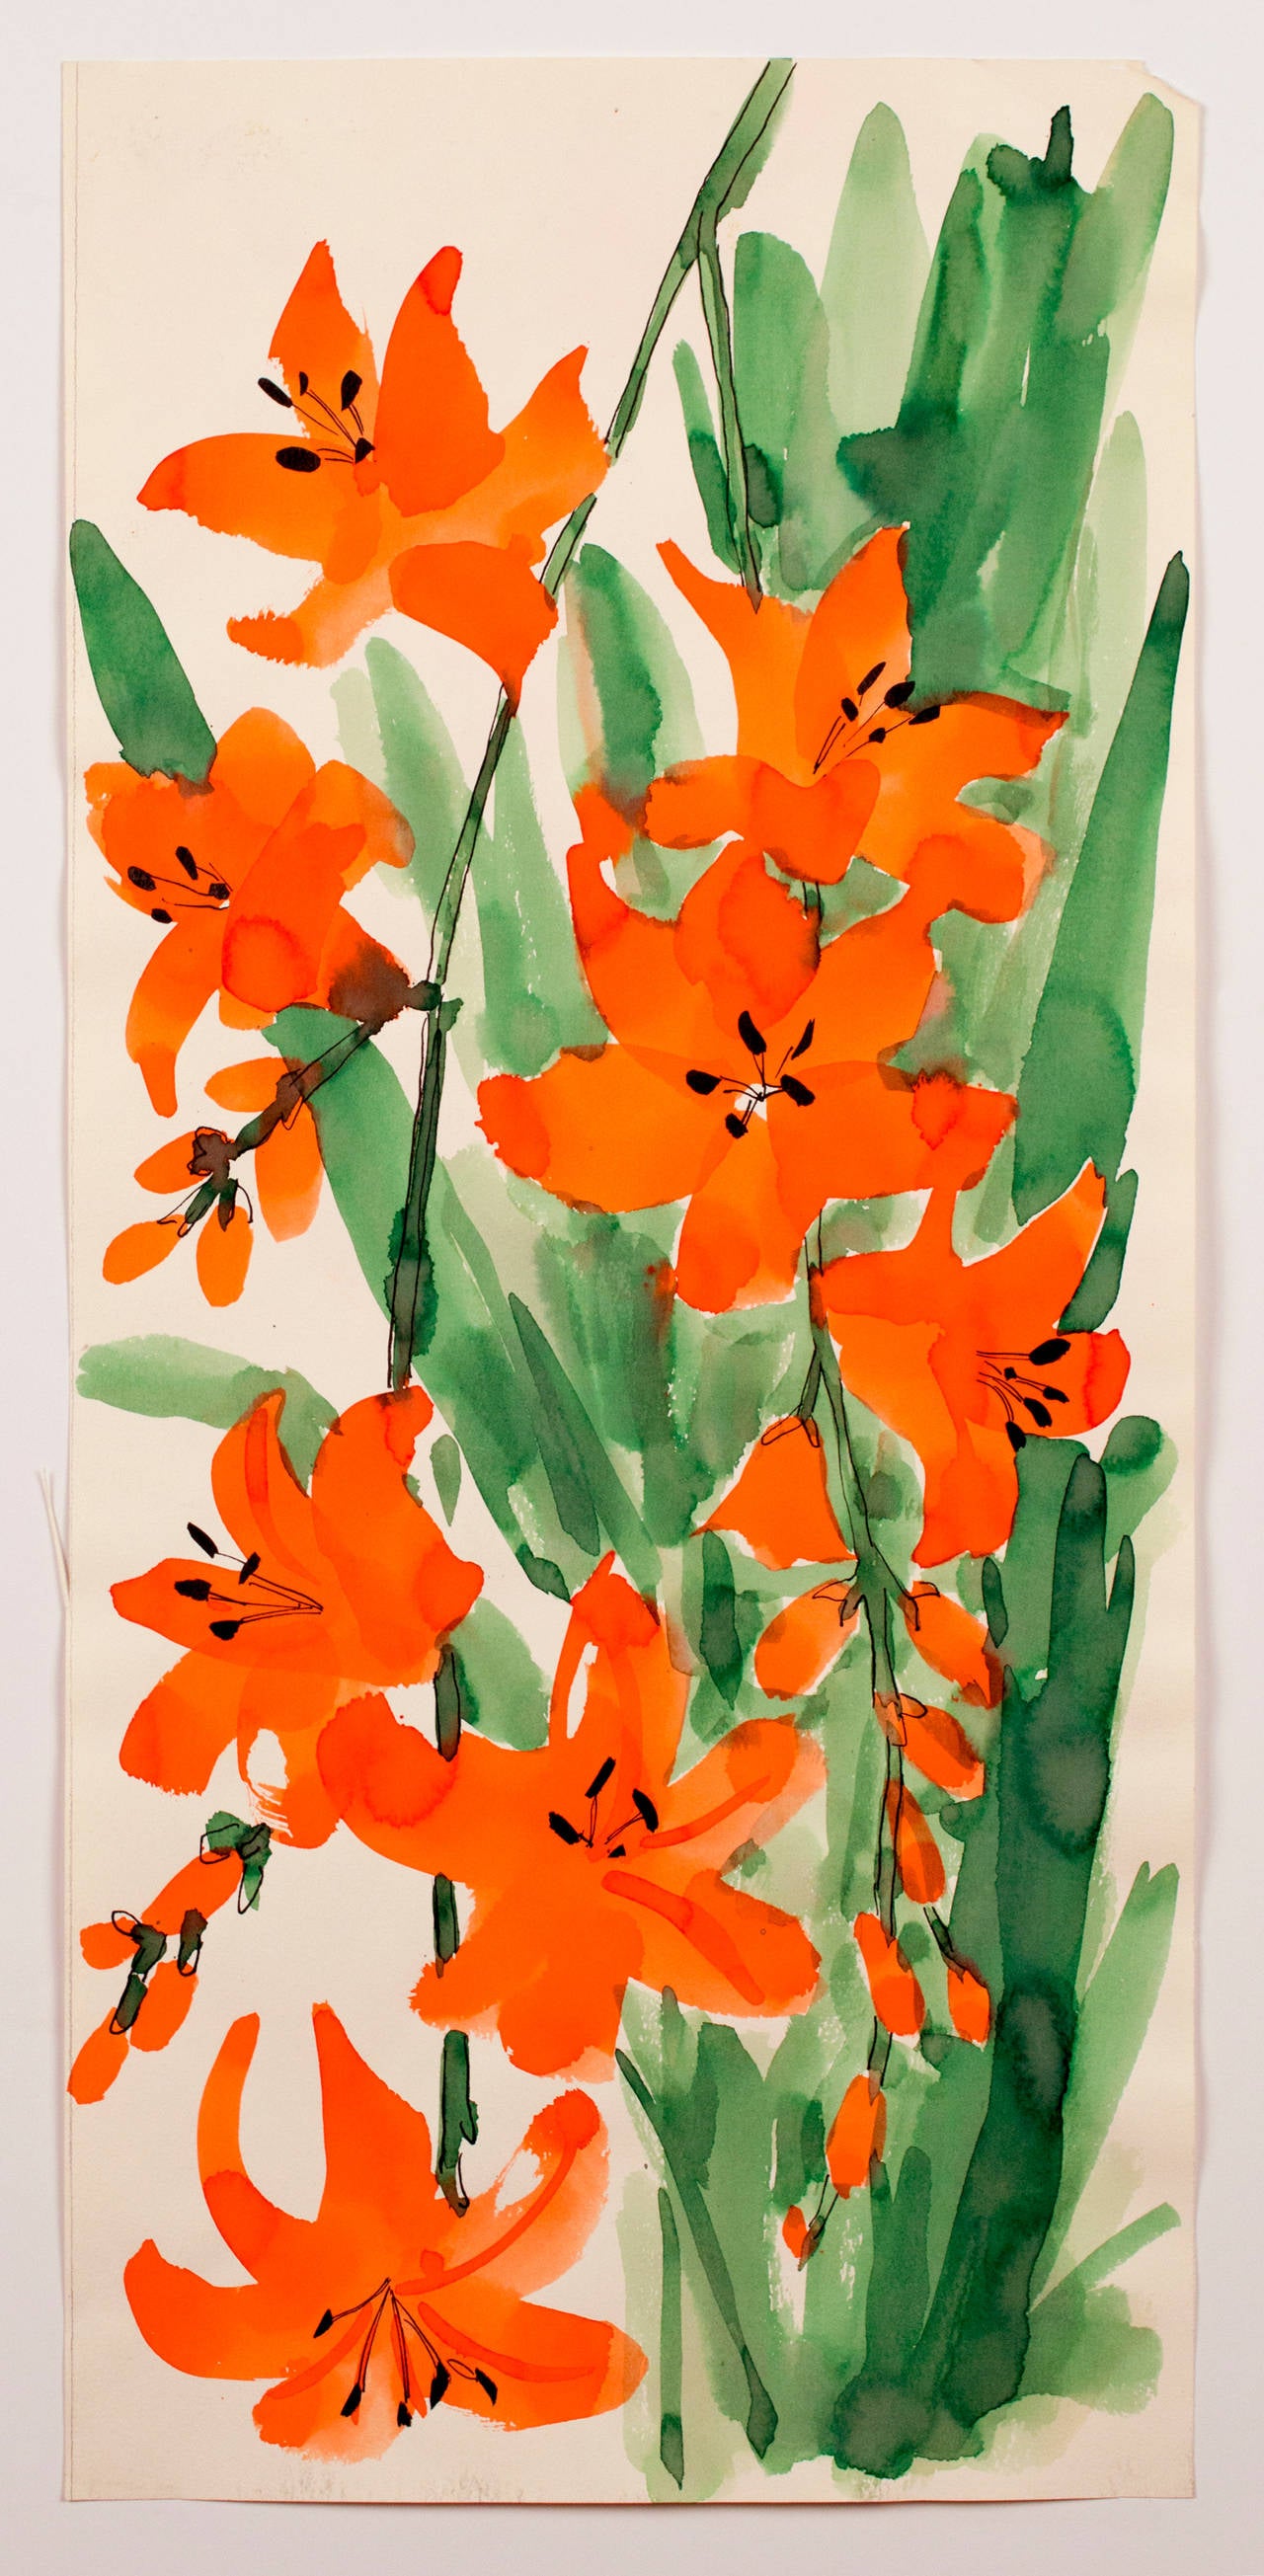 Untitled, from the "Florals" series - Art by Vera Neumann